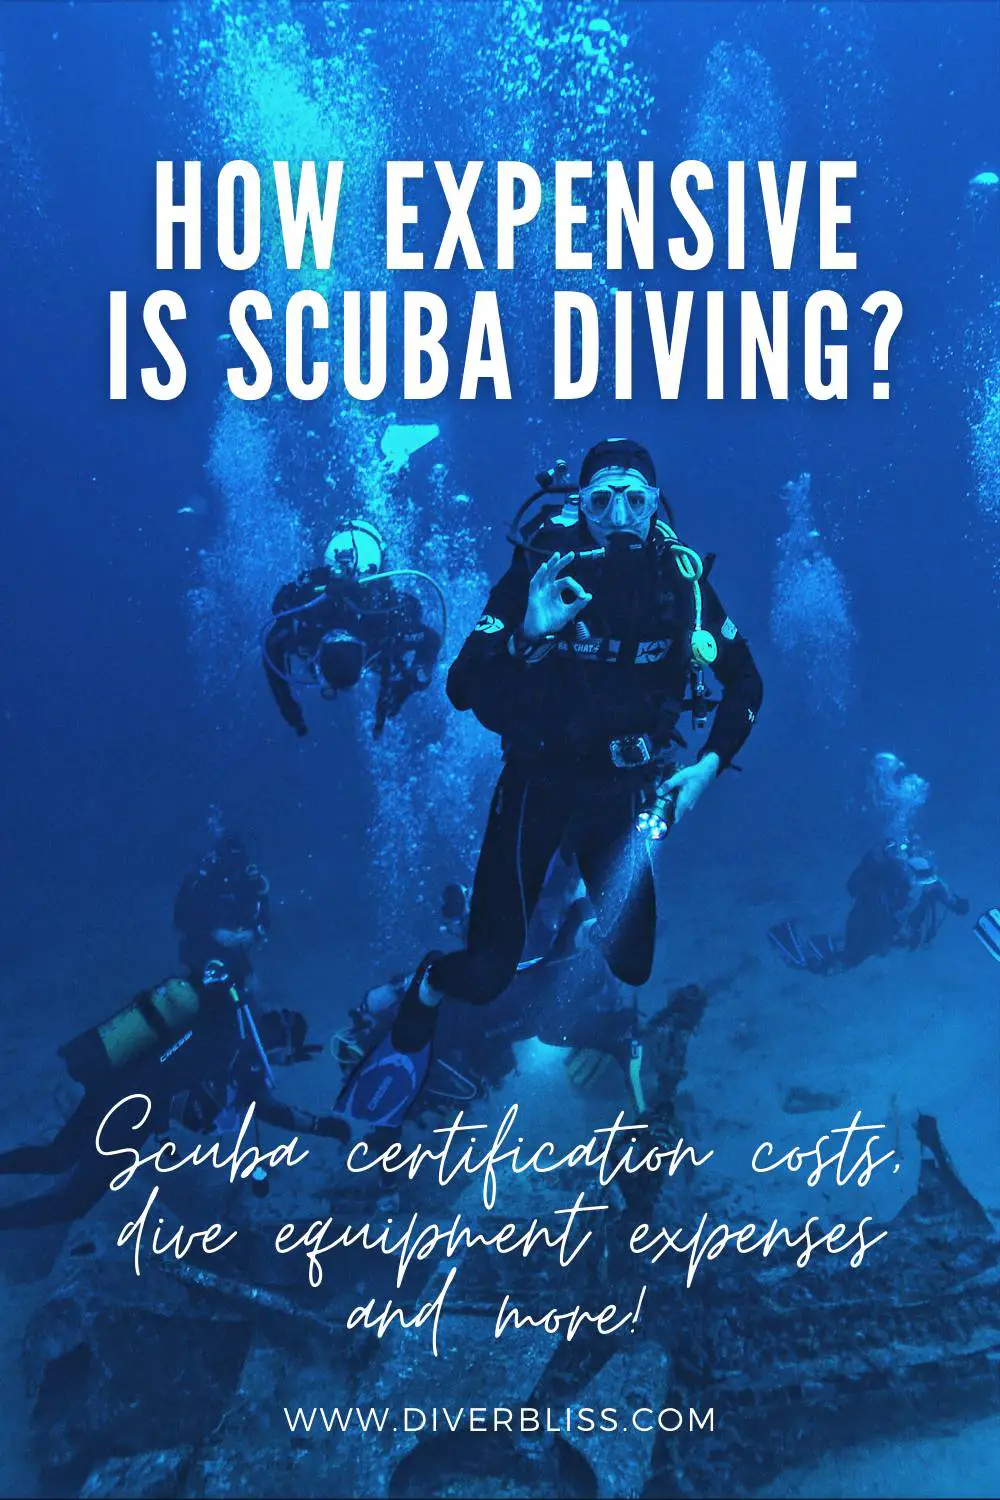 How expensive is scuba diving? get a breakdown of scuba certification costs, dive equipment expenses and more! 